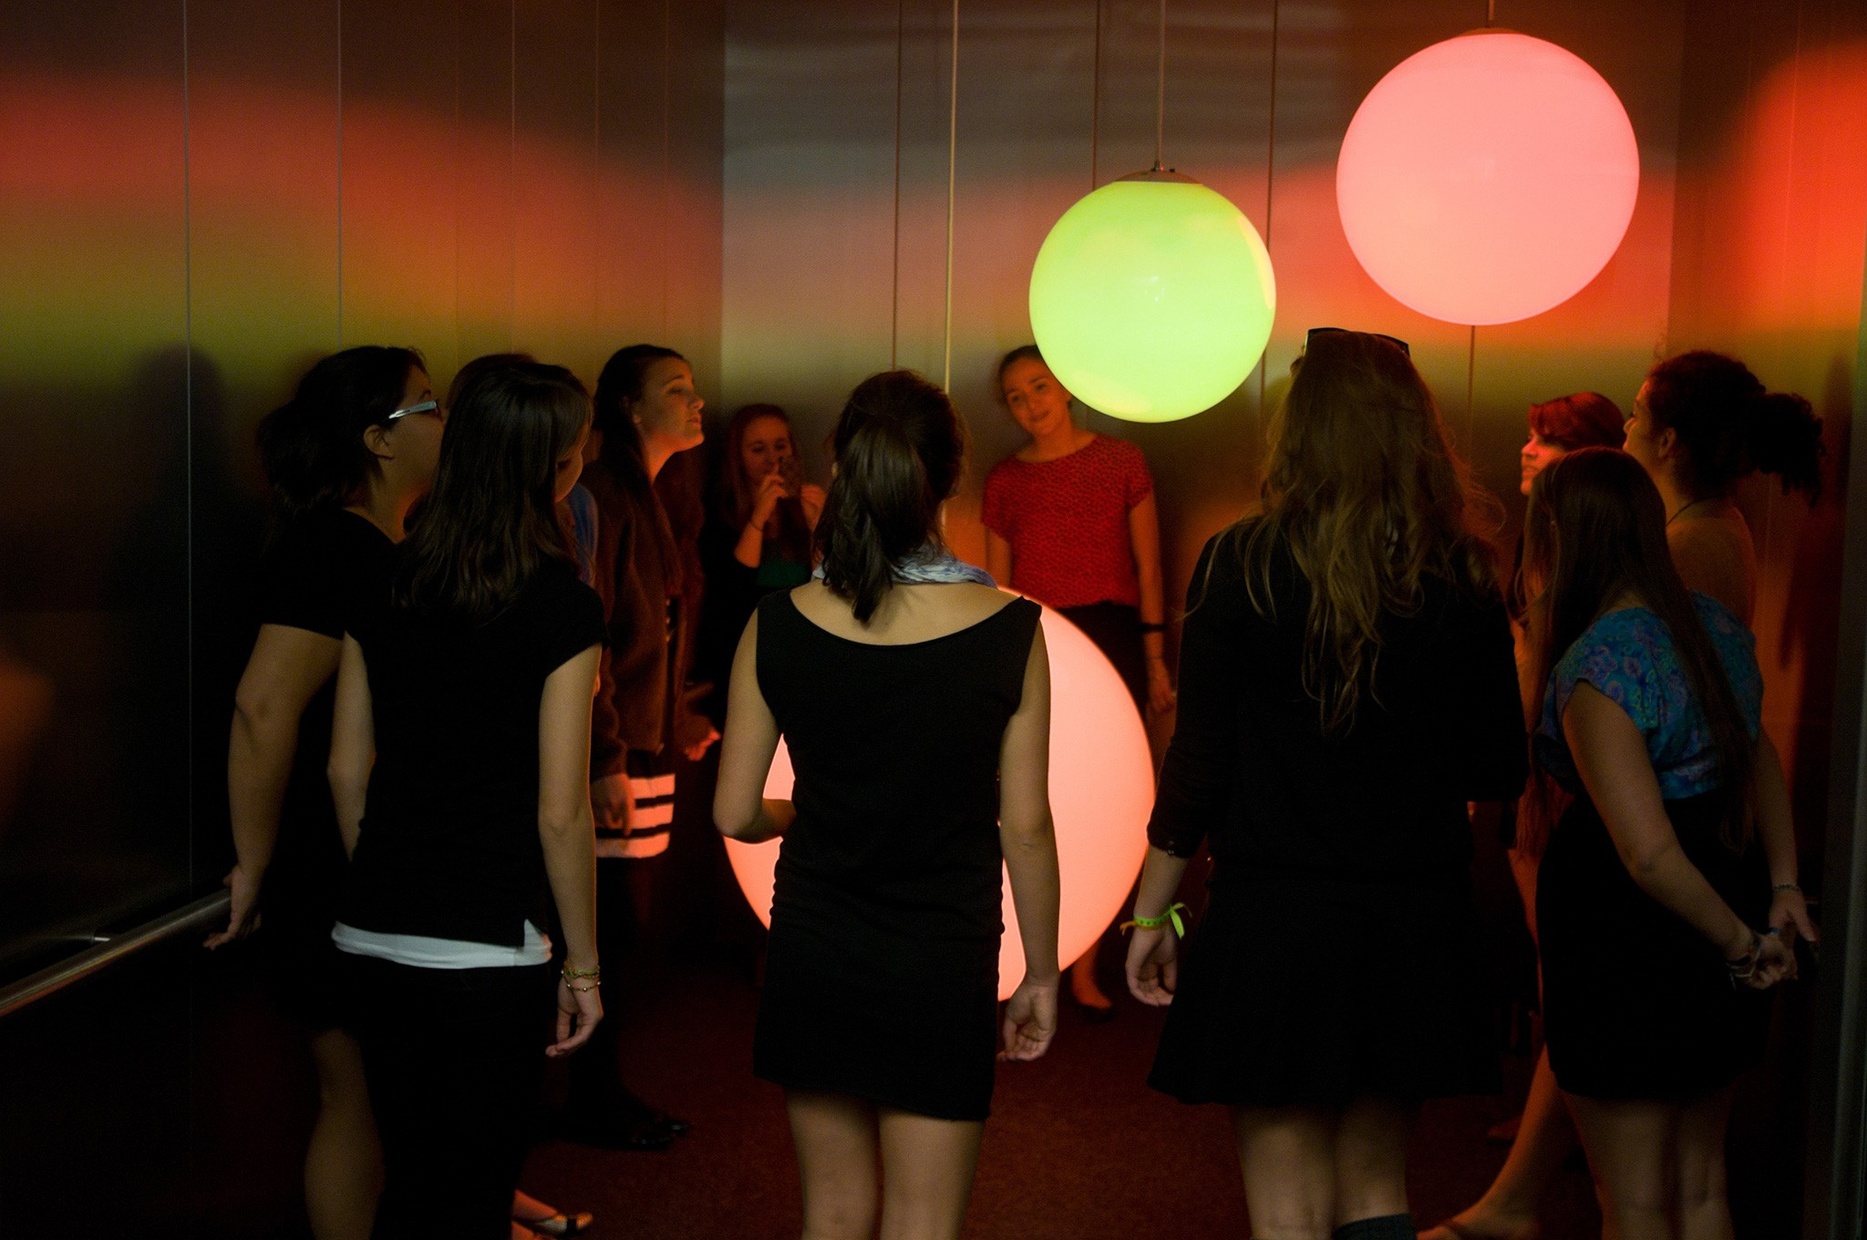 A group of people crowd in an elevator to look at three, large glowing spheres hanging from the ceiling at different heights. Two of the spheres glow red and one glows yellow.